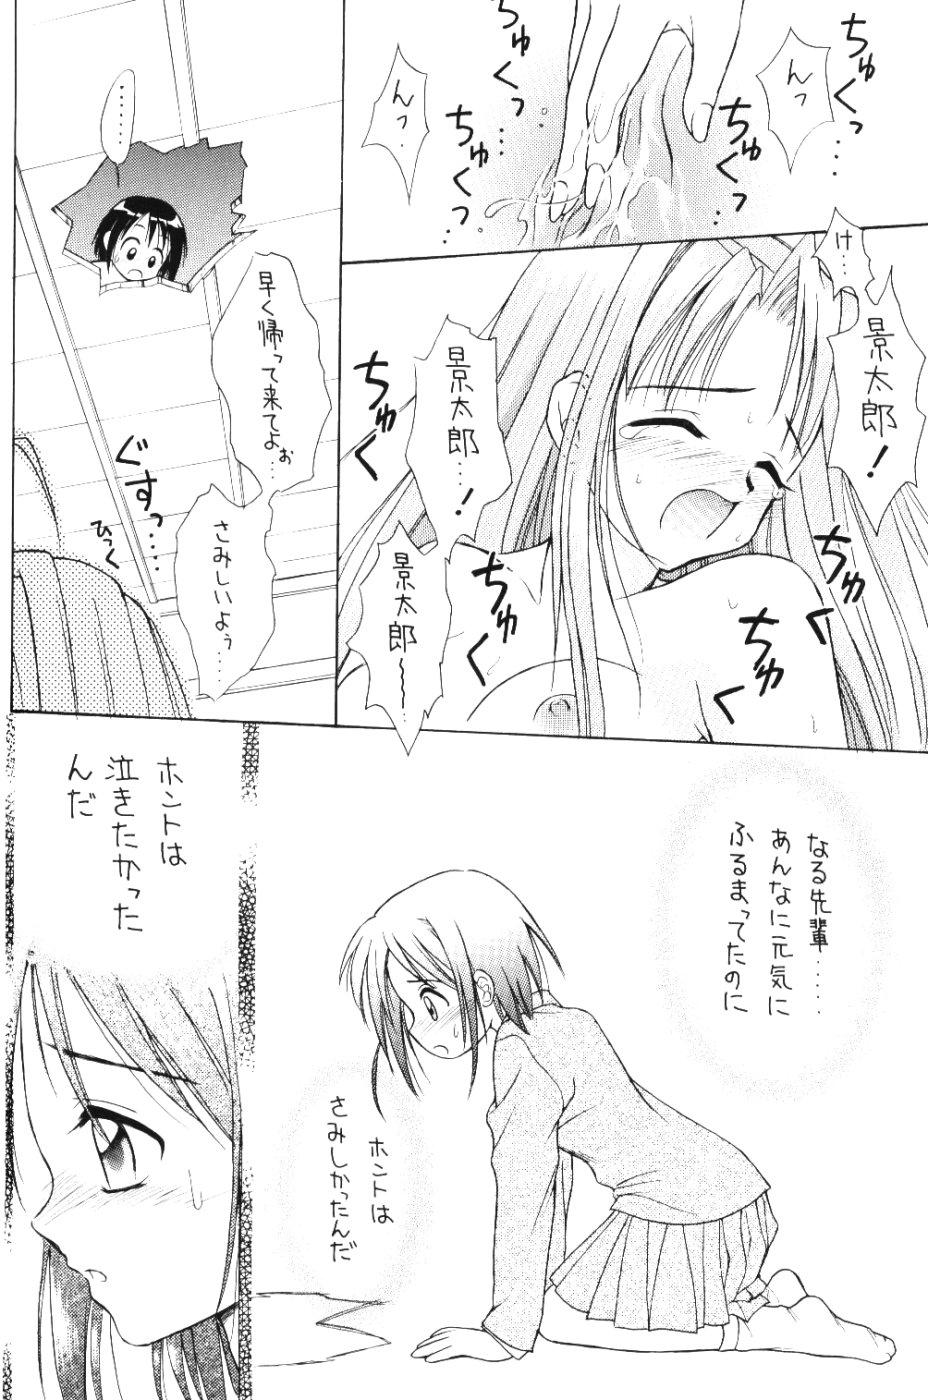 Piroca Lovely 4 - Love hina Gay Amateur - Page 11